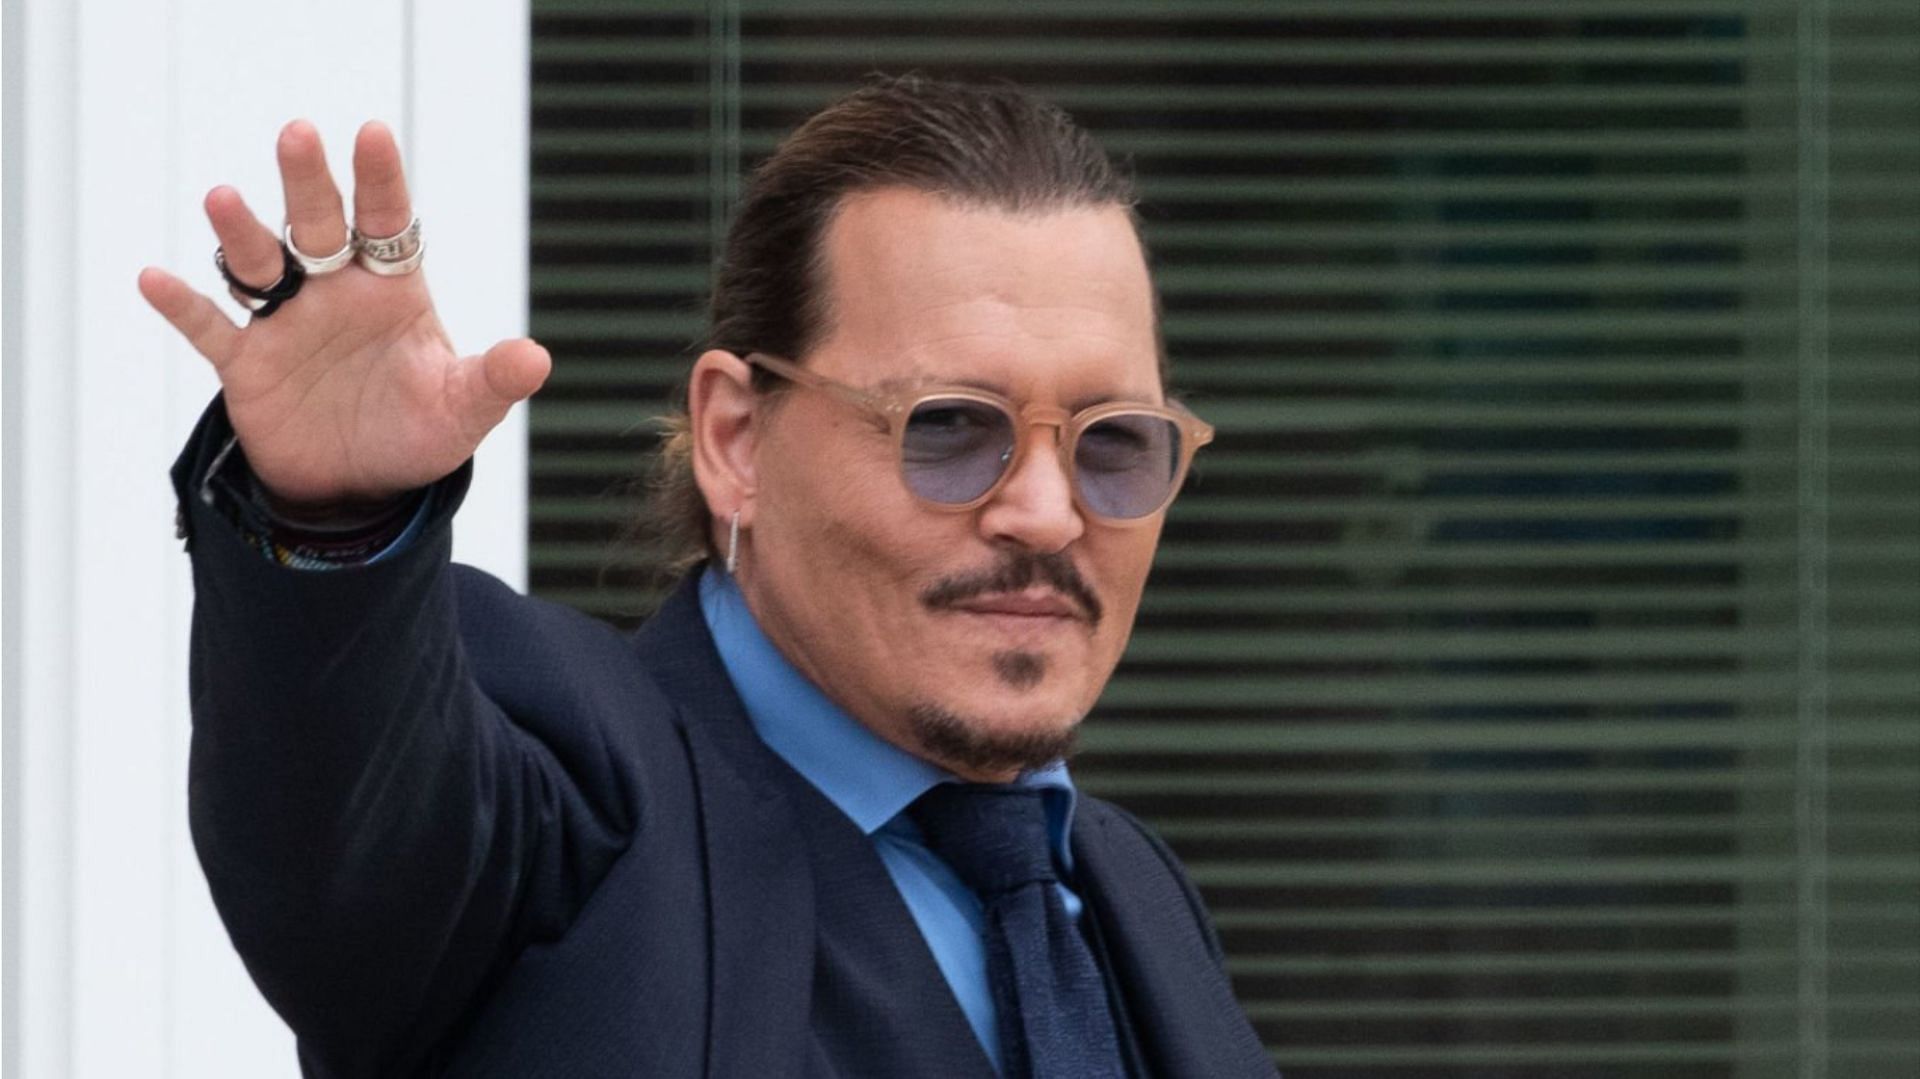 Video: Johnny Depp Impersonating Willy Wonka From 'Charlie And The  Chocolate Factory' For Young Fans After Defamation Trial Goes Viral On  Social Media